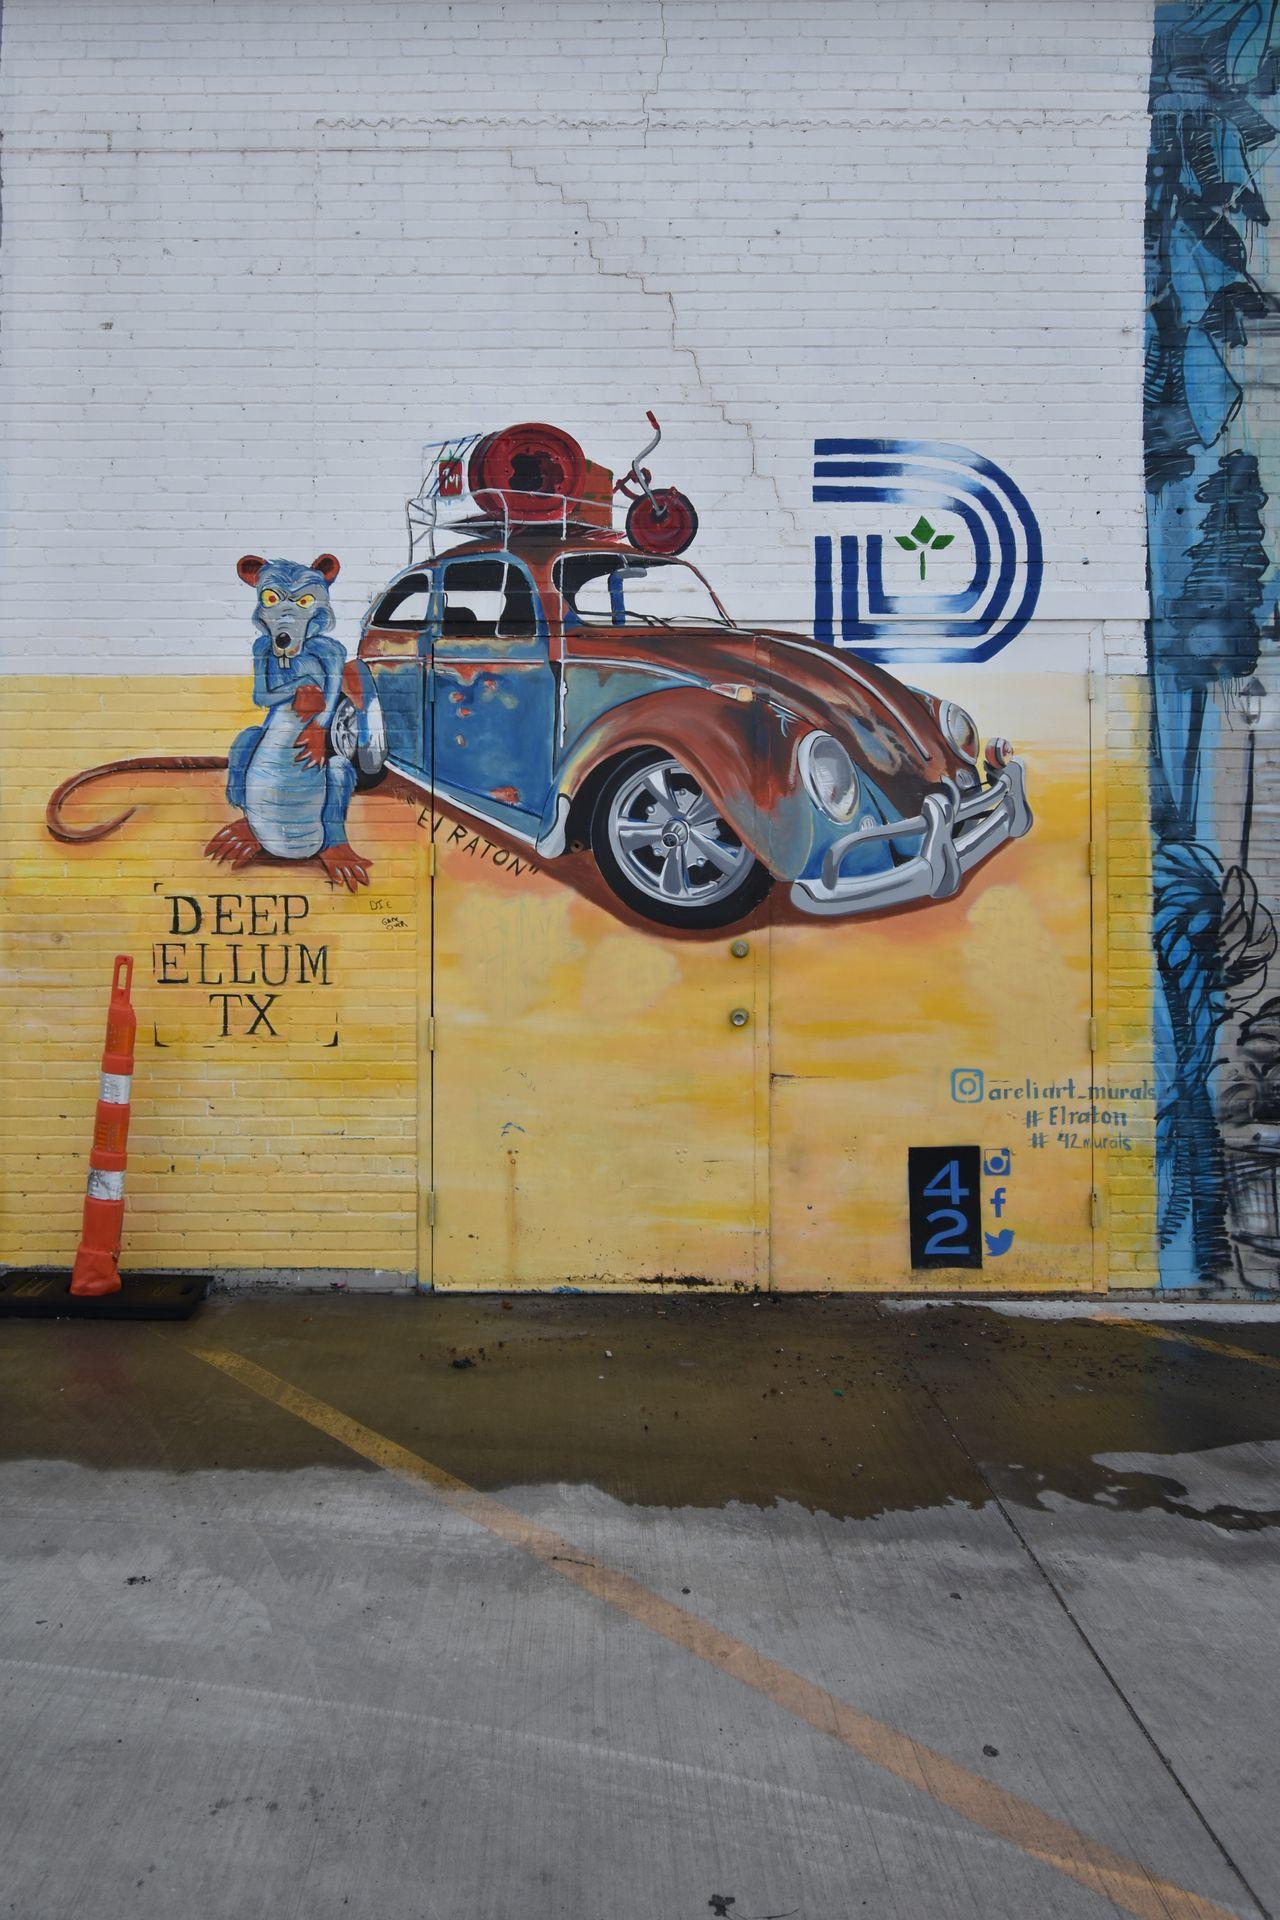 A mural with a vintage Volkswagen beetle, with a giant mouse next to it.